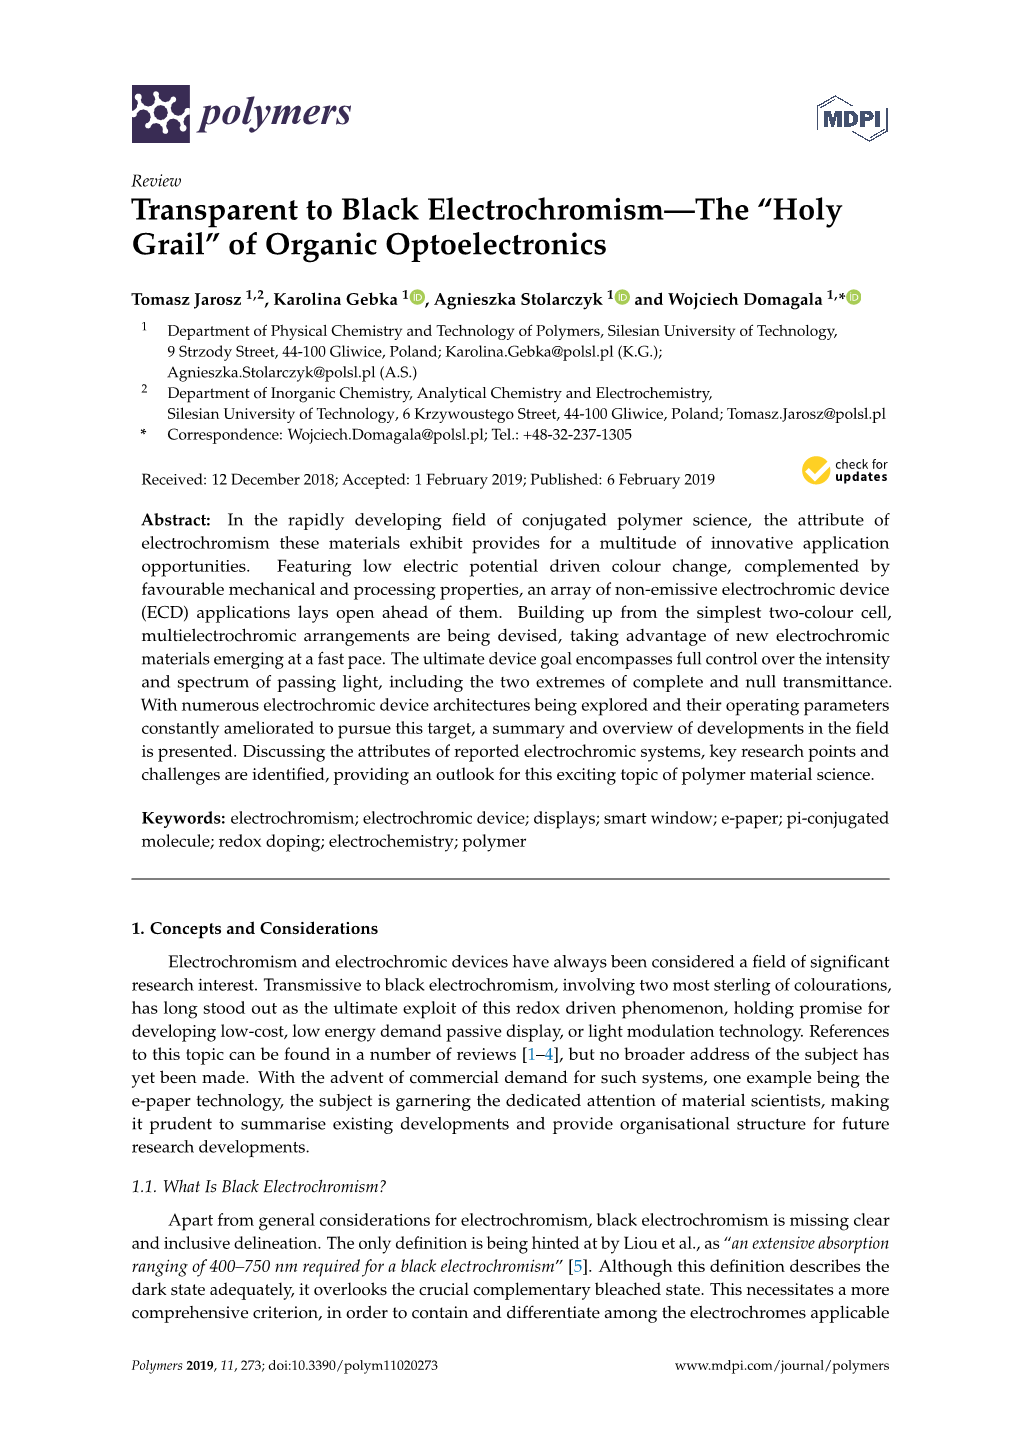 Transparent to Black Electrochromism—The “Holy Grail” of Organic Optoelectronics